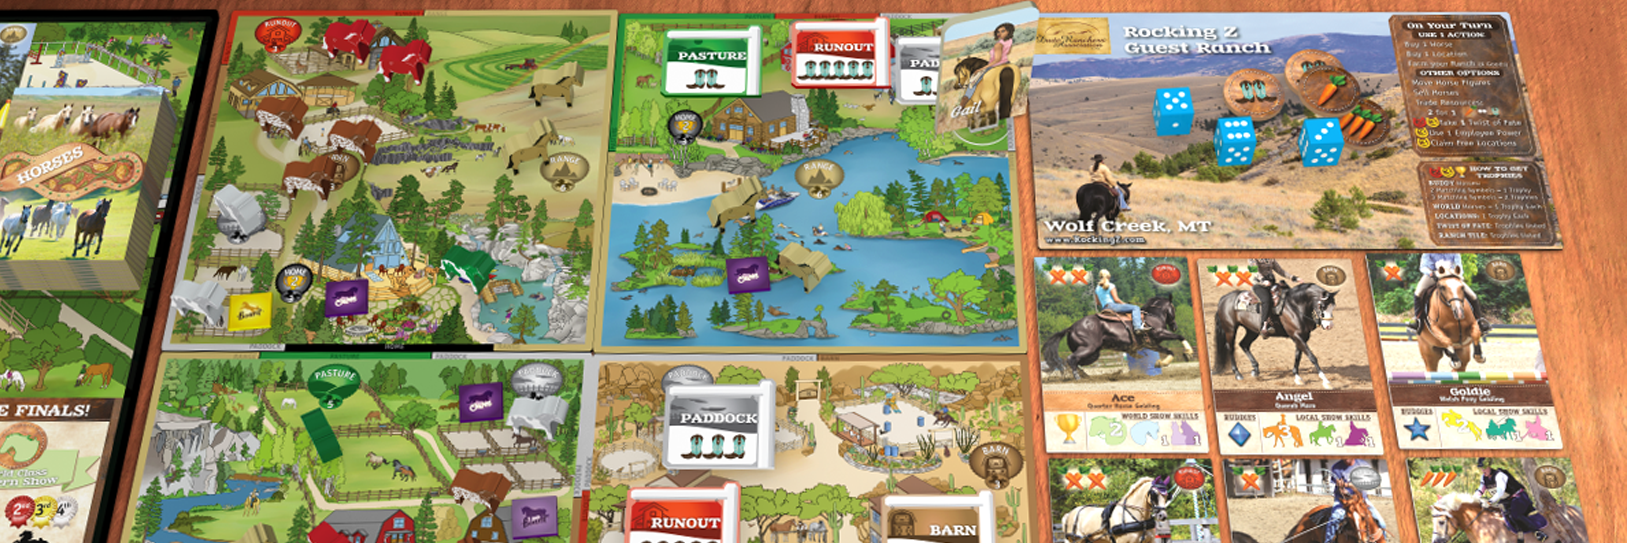 A preview of Fantasy Ranch for the title of the game's description.